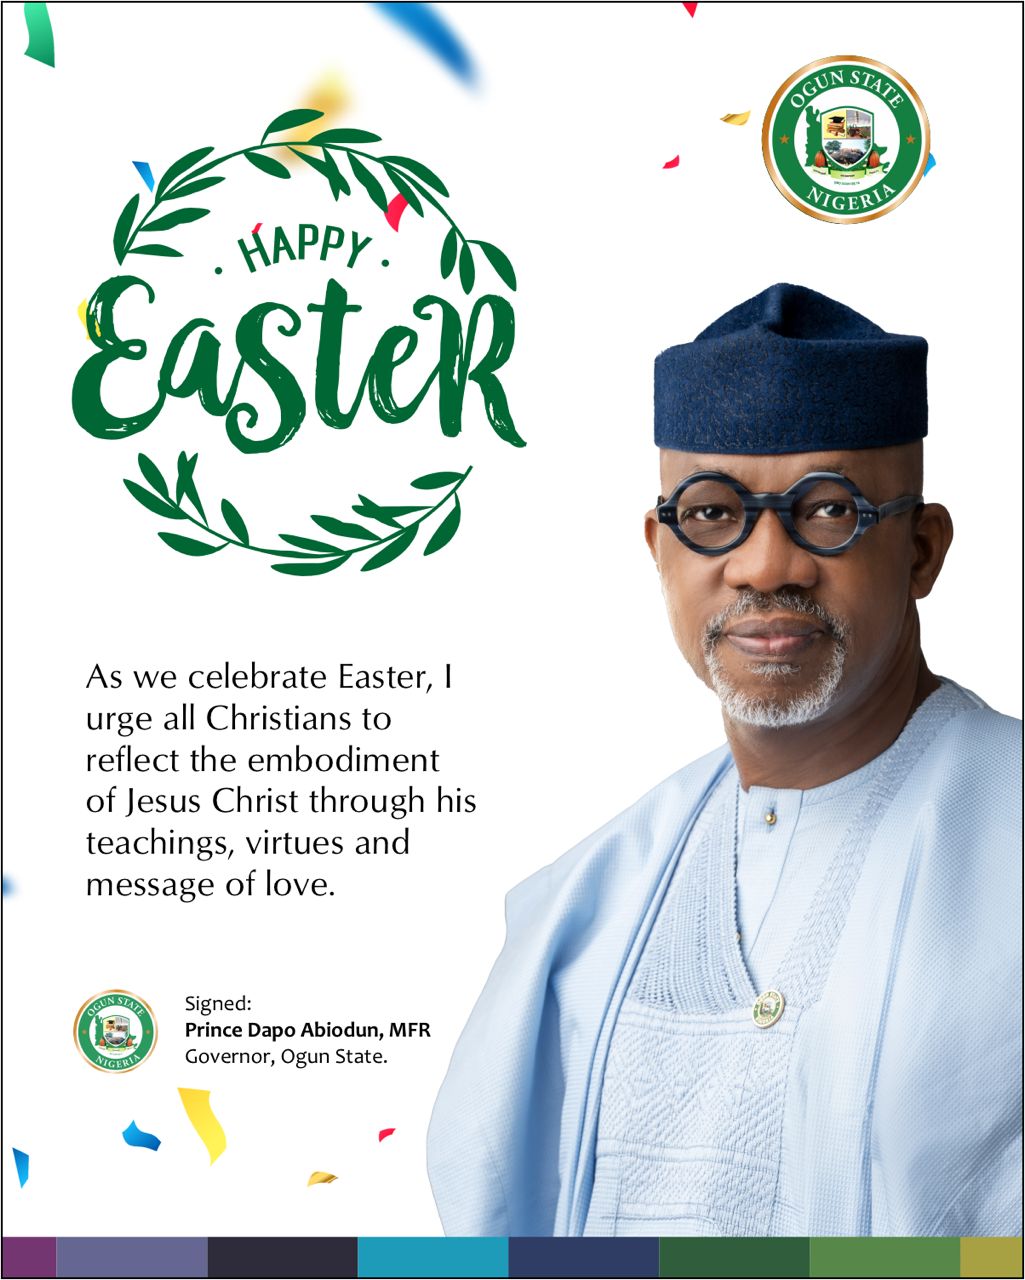 Easter: Gov Abiodun urges Christians to live teachings, virtues, message of love by Jesus